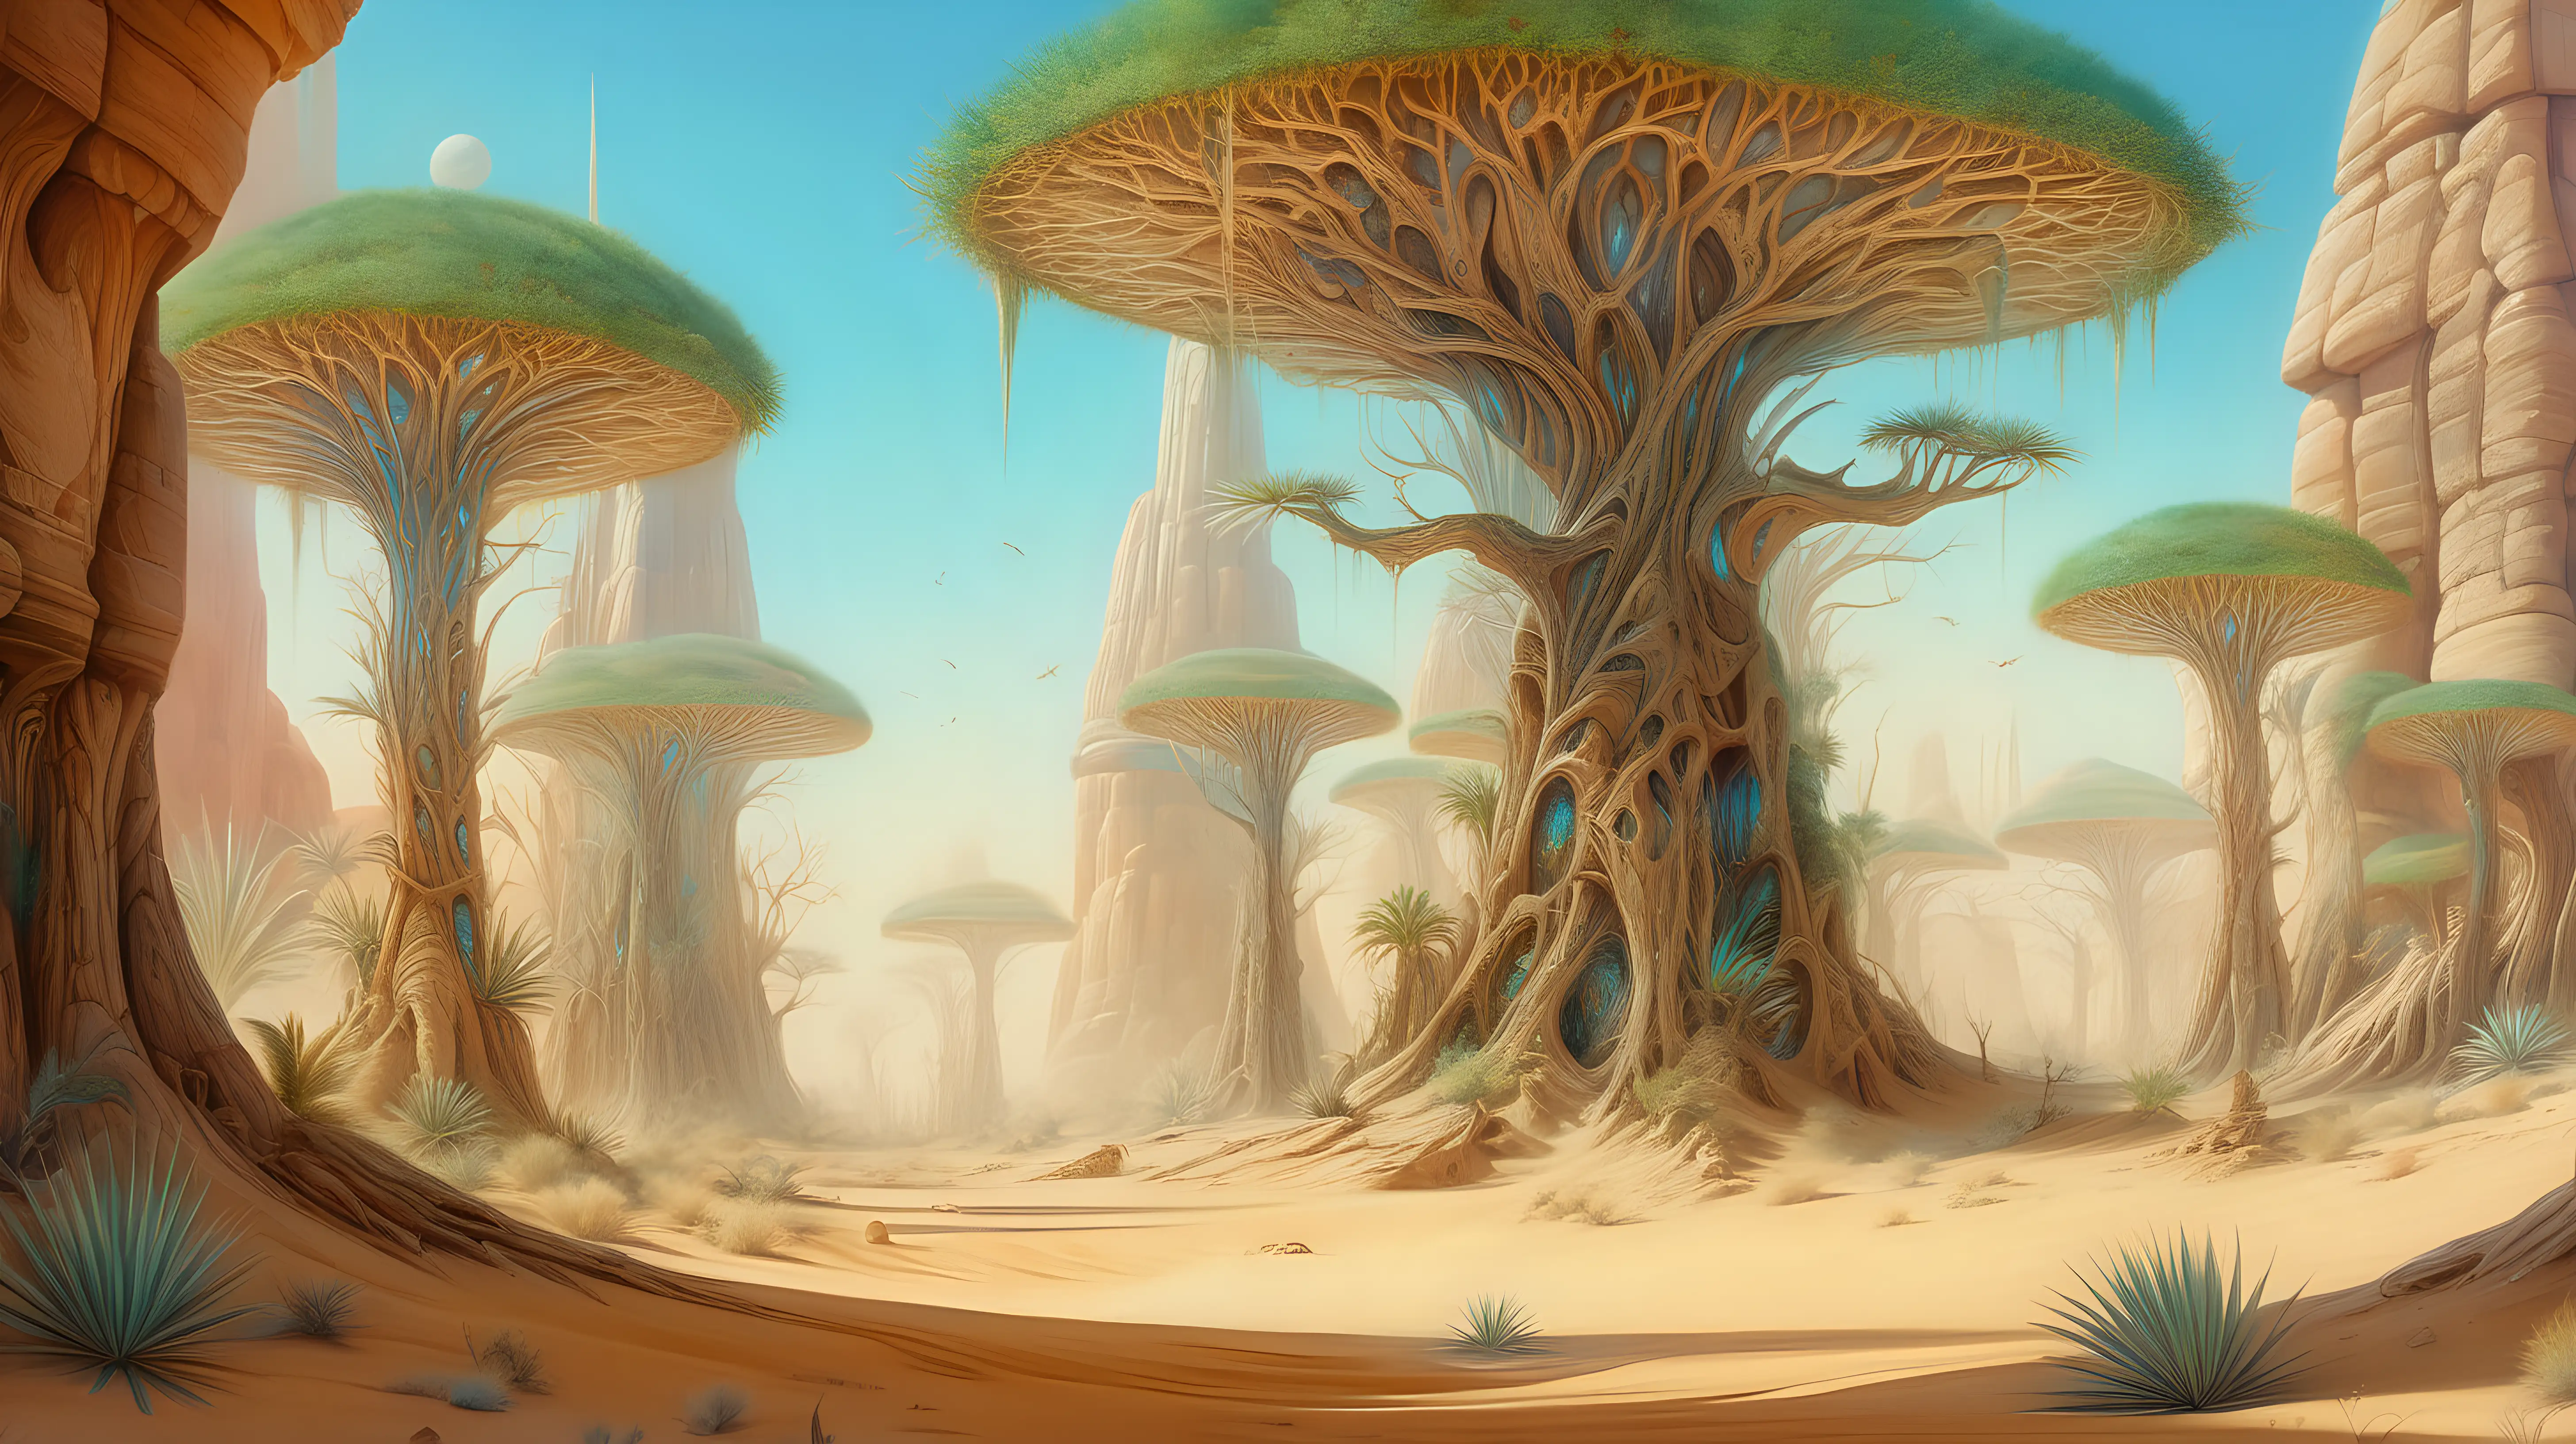 A mirage of an ancient forest emerging from the desert sands, its lush foliage and towering trees pulsating with psychedelic energy, creating a surreal oasis of life amidst the arid landscape.